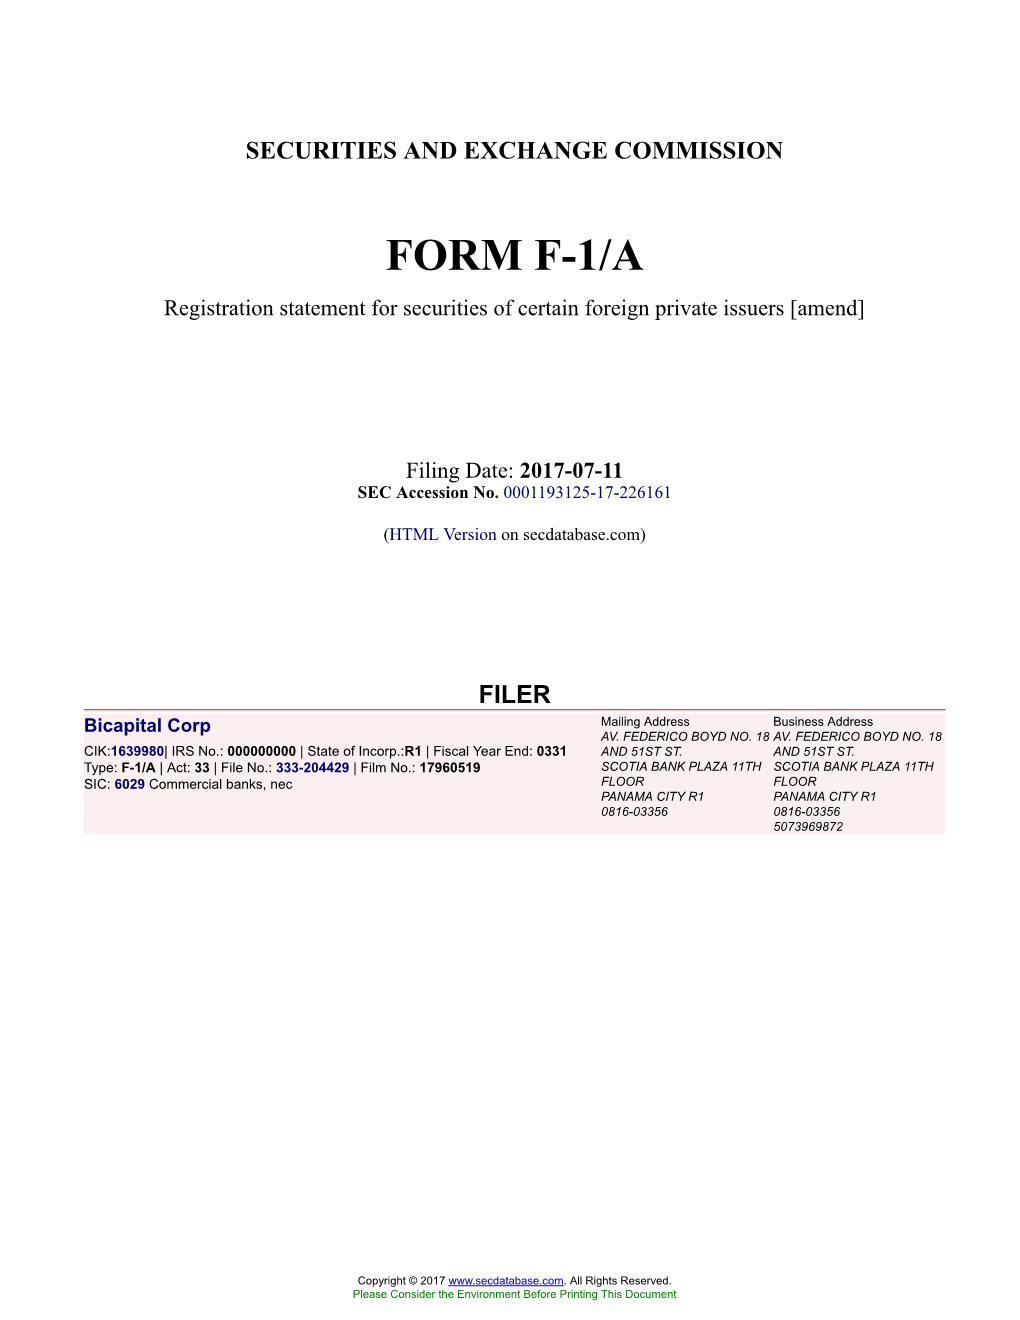 Bicapital Corp Form F-1/A Filed 2017-07-11